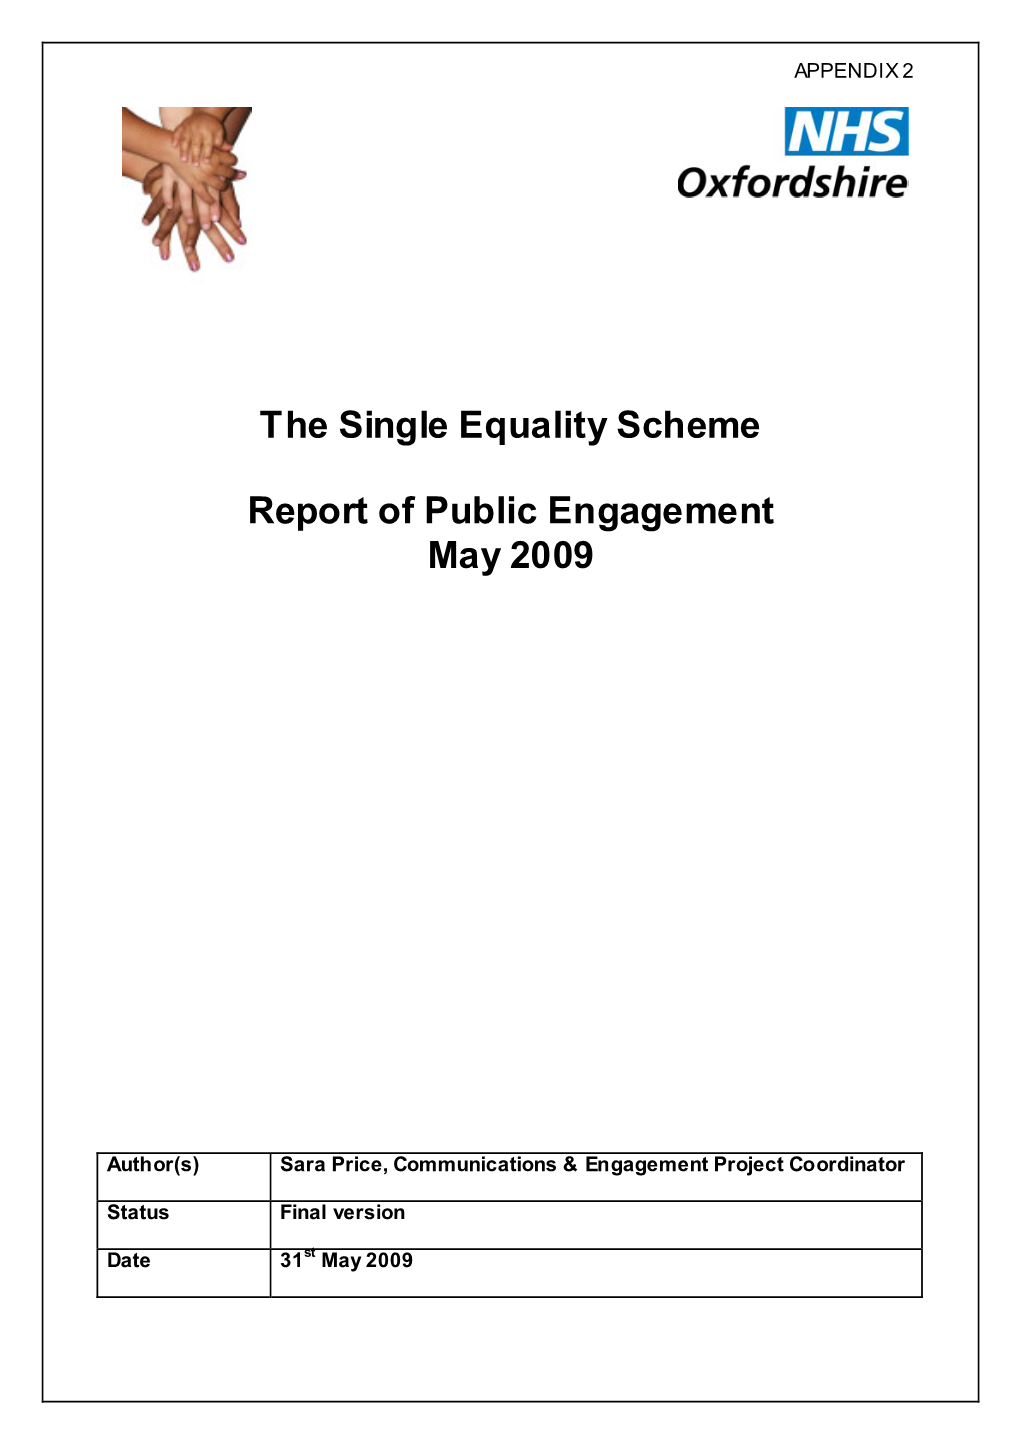 The Single Equality Scheme Report of Public Engagement May 2009